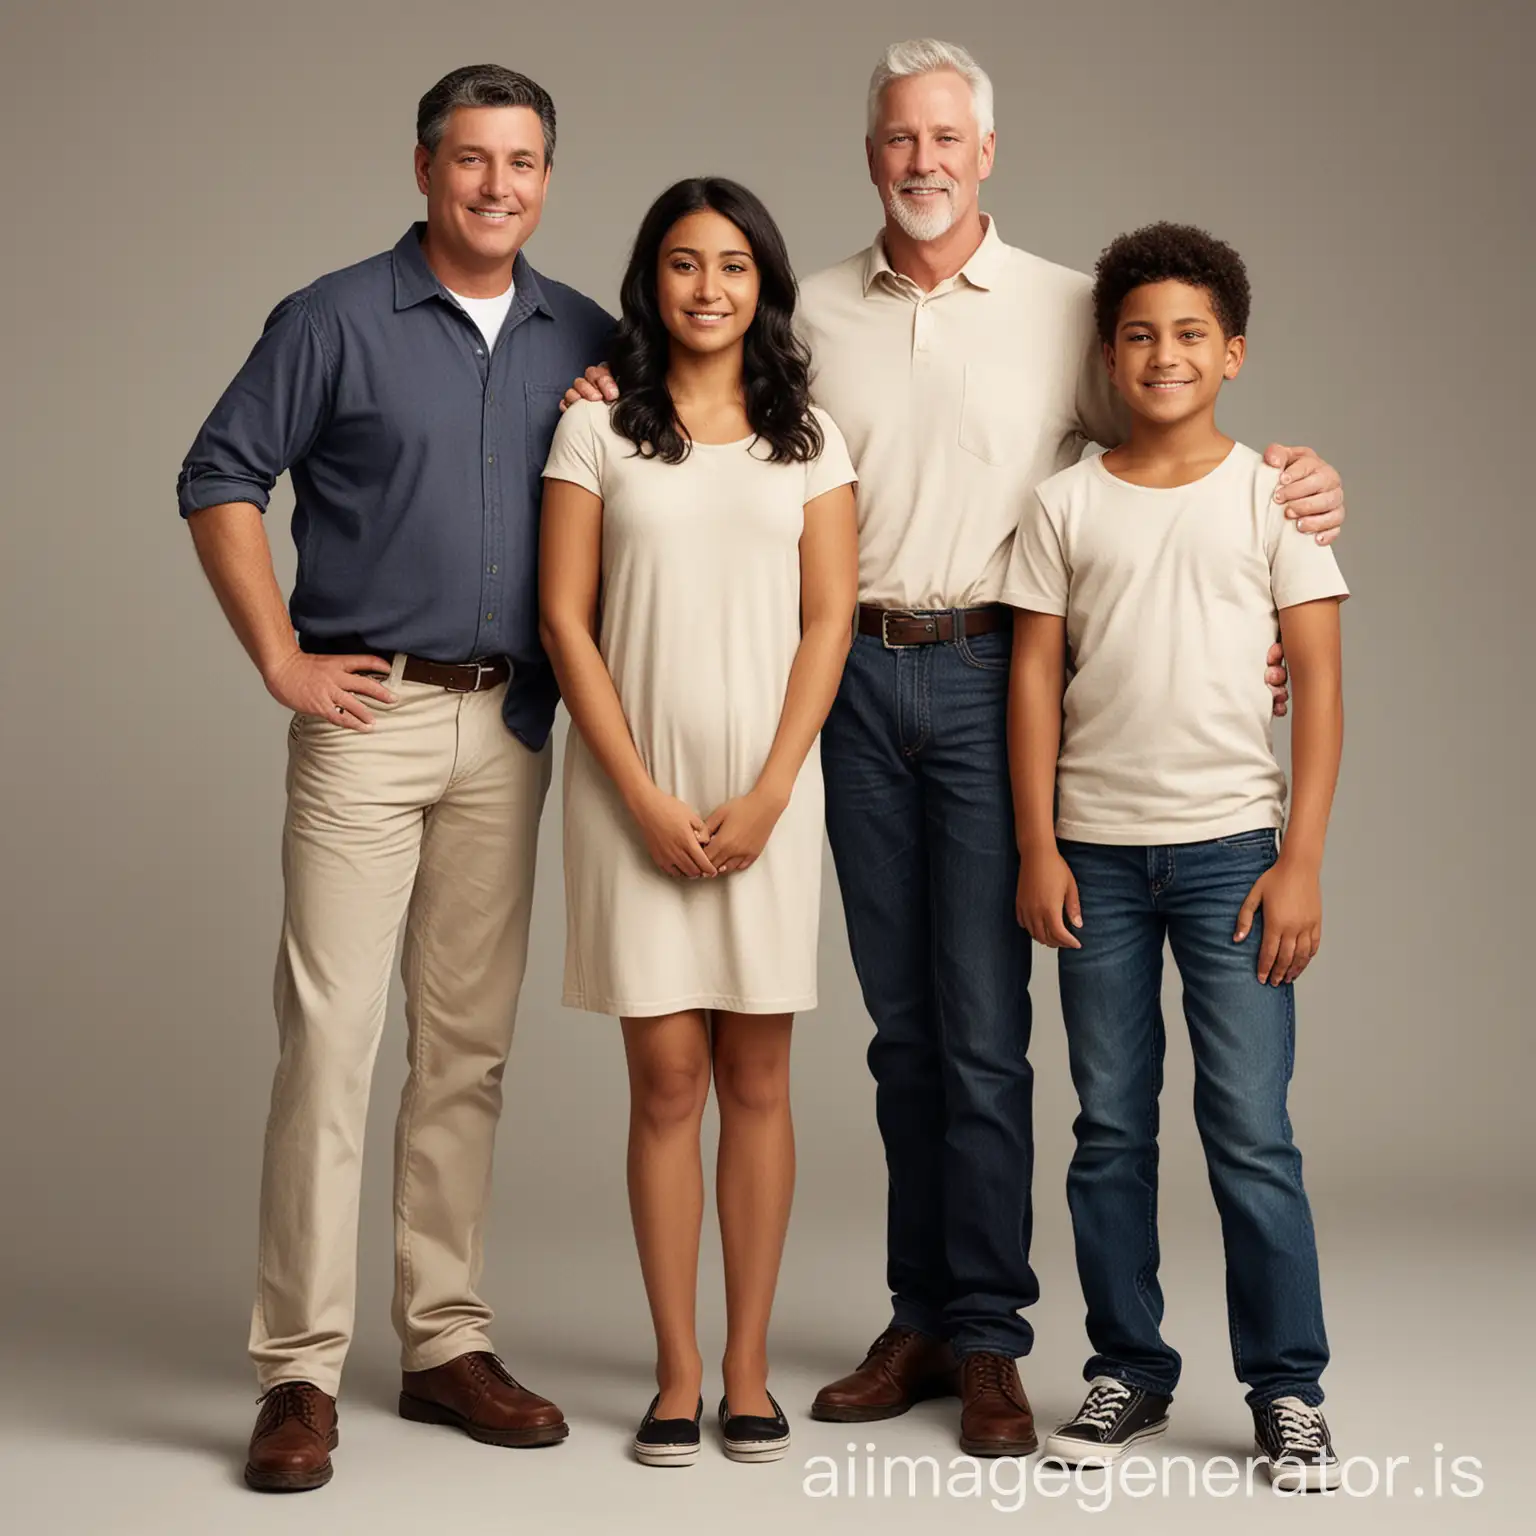 Diverse-Family-Portrait-Tall-White-Father-Brown-Skinned-Mother-and-Three-Children